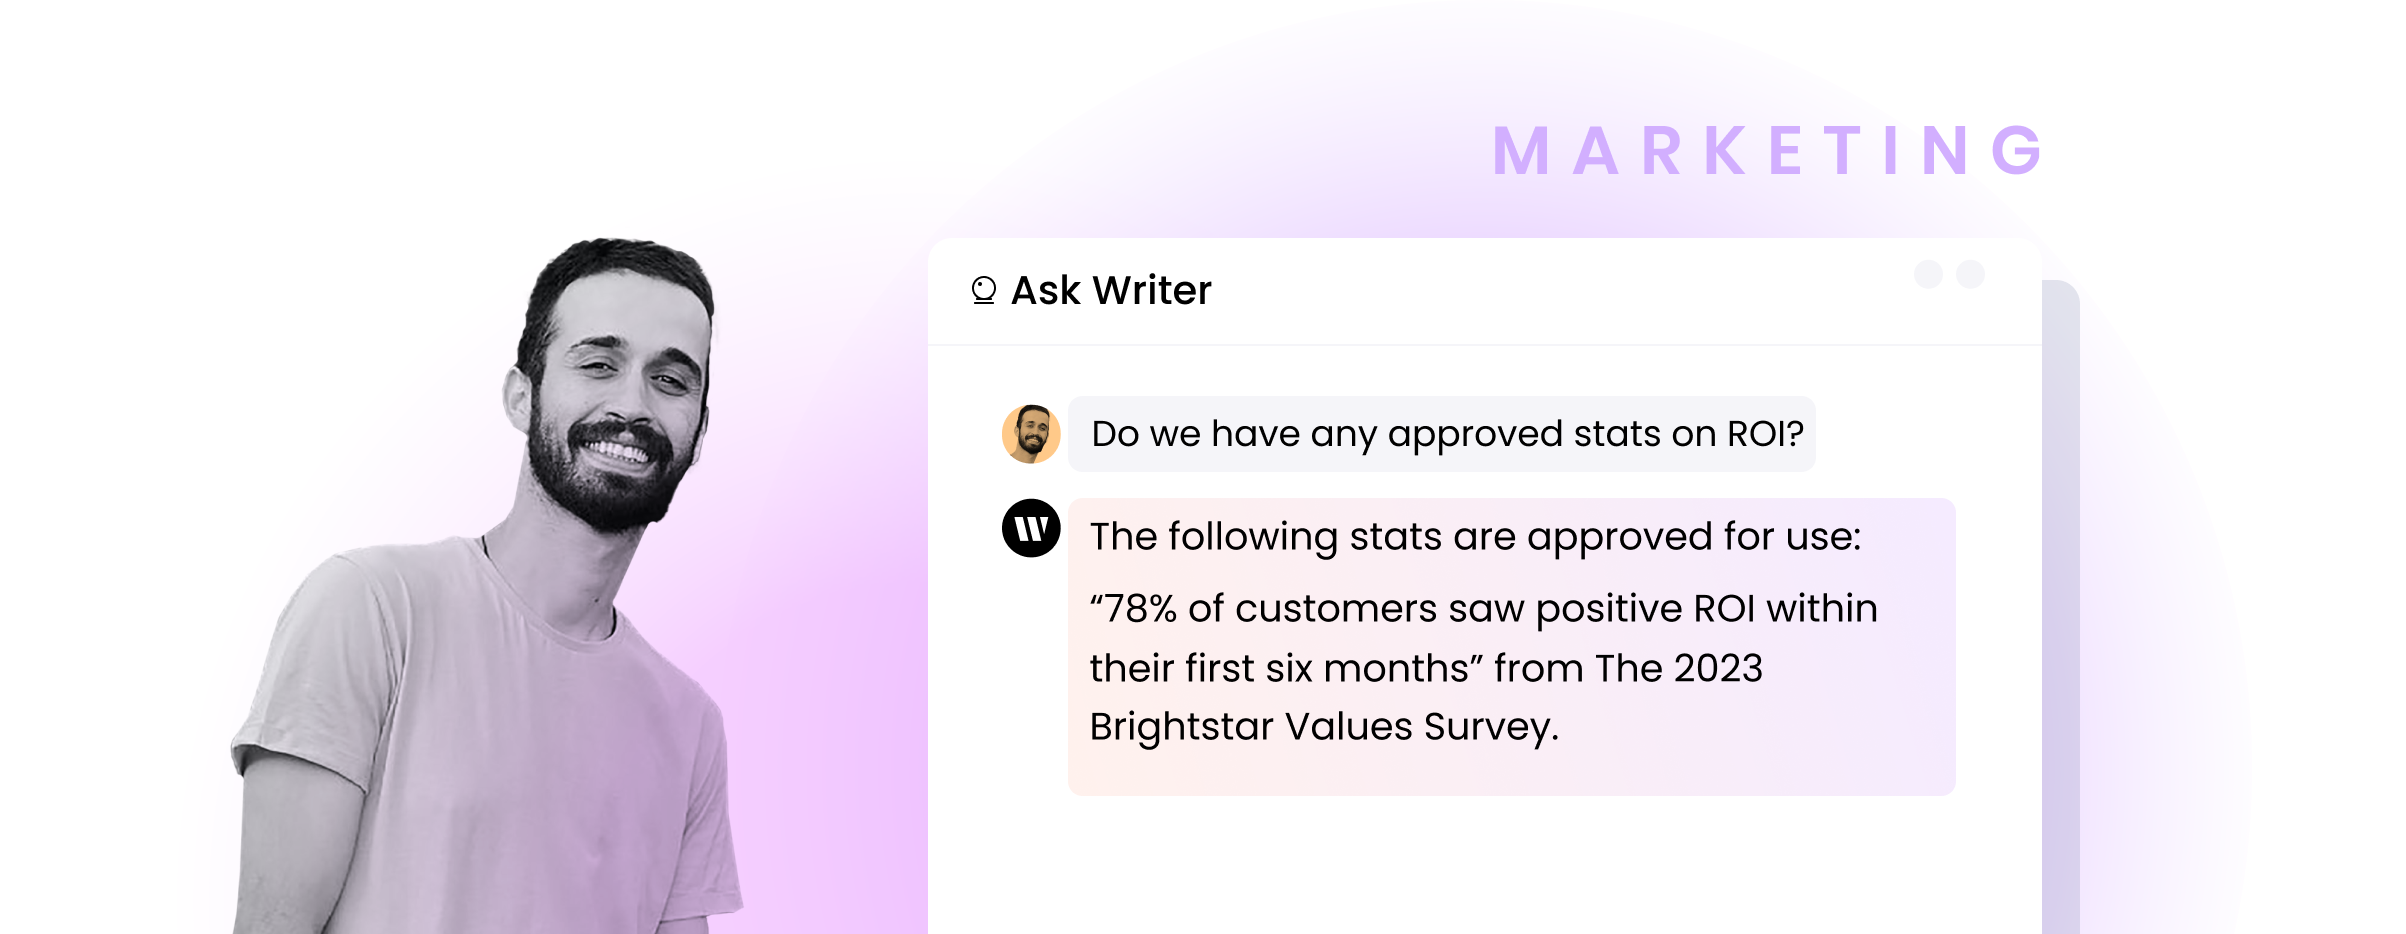 Marketing person using Ask Writer. Question: Do we have any approved stats on ROI? Response: The following stats are approved for use: 
“78% of customers saw positive ROI within their first six months” from The 2023 Brightstar Values Survey.